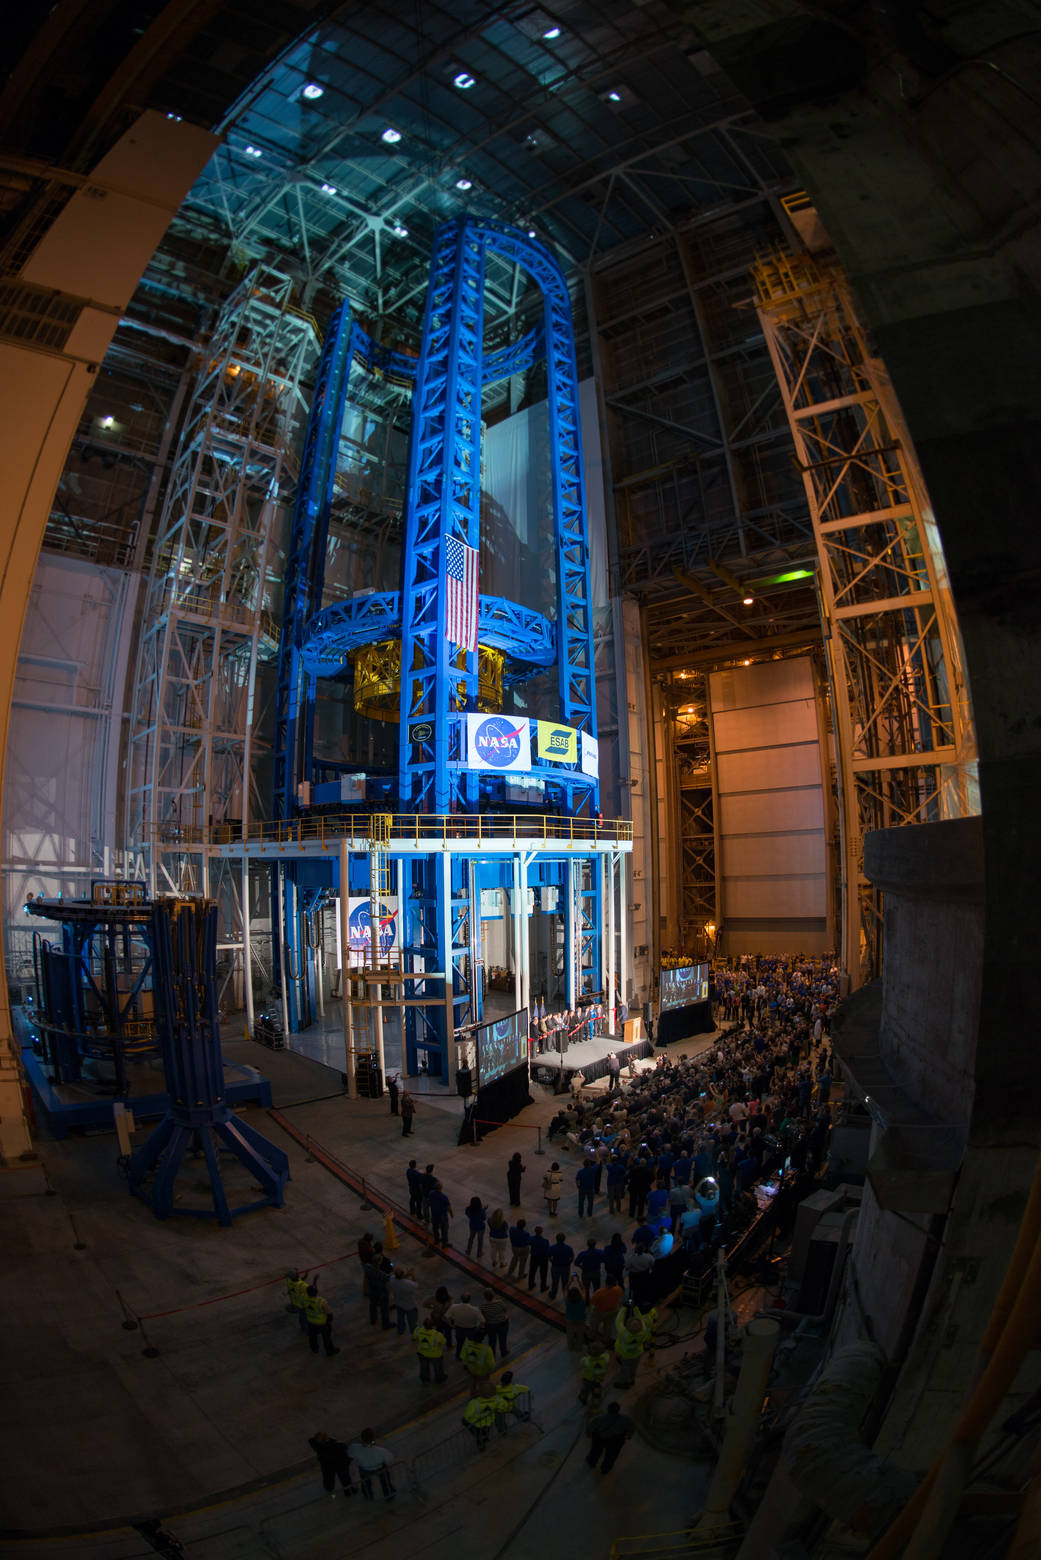 The largest spacecraft welding tool in the world, the Vertical Assembly Center officially is open for business at NASA's Michoud